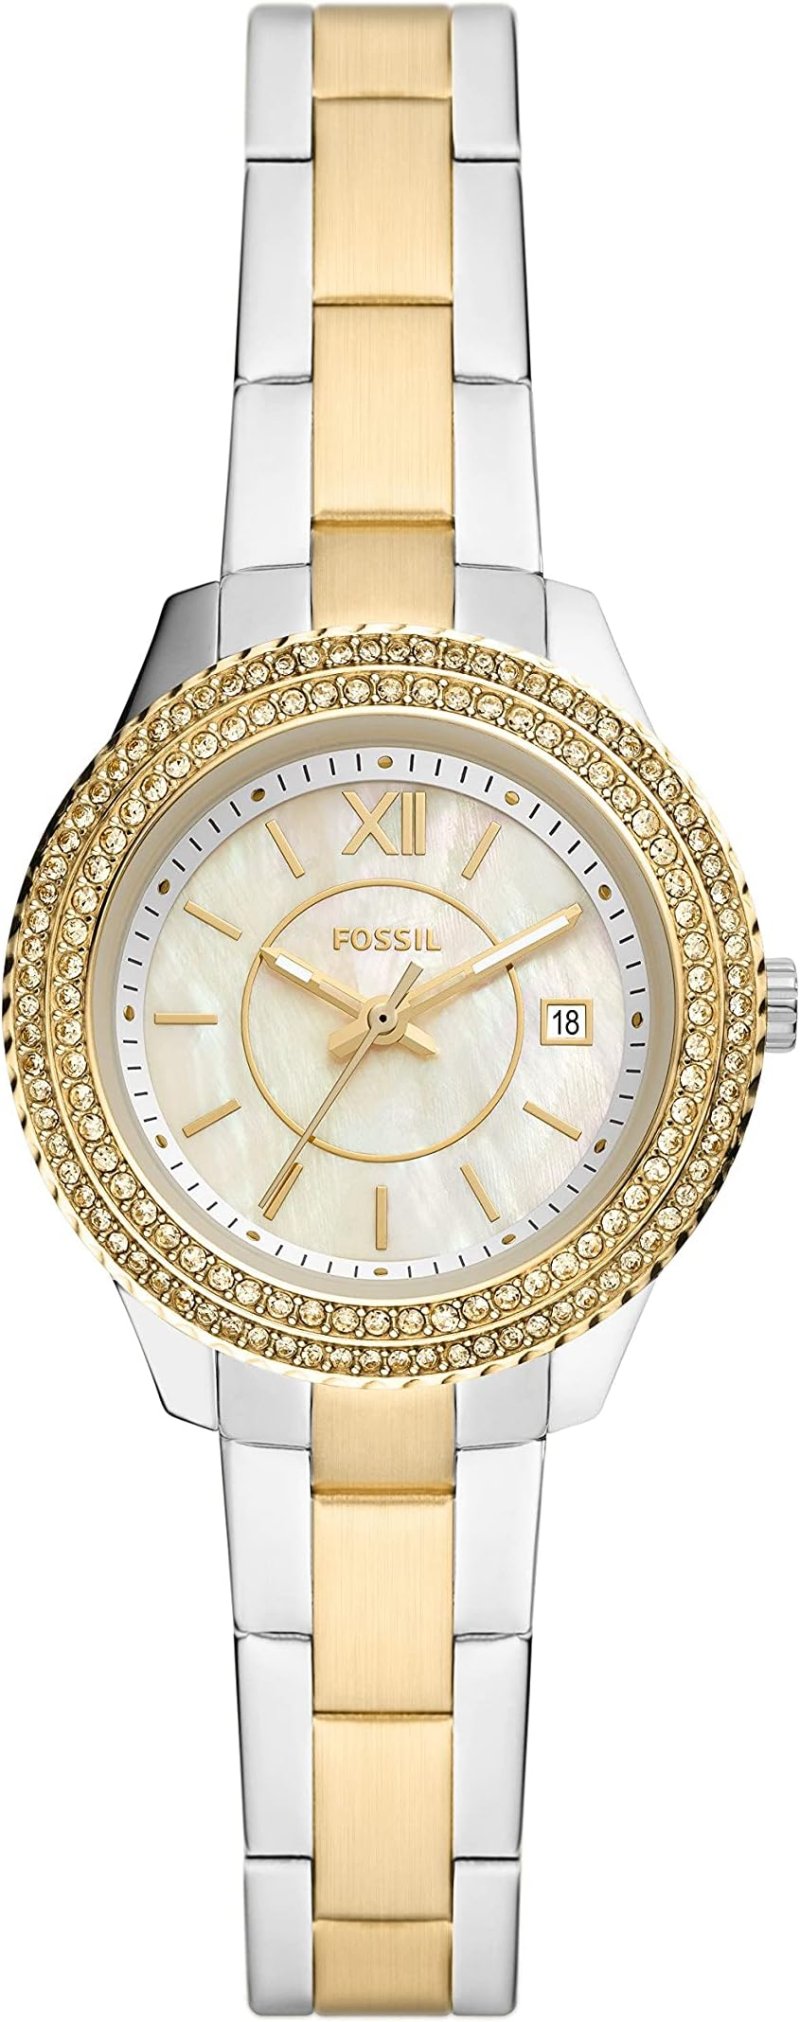 Часы 18 mm - Stella Mini Three Hand Date Stainless Steel Dress Watch - ES5138 Fossil, цвет Two-Tone Silver/Gold